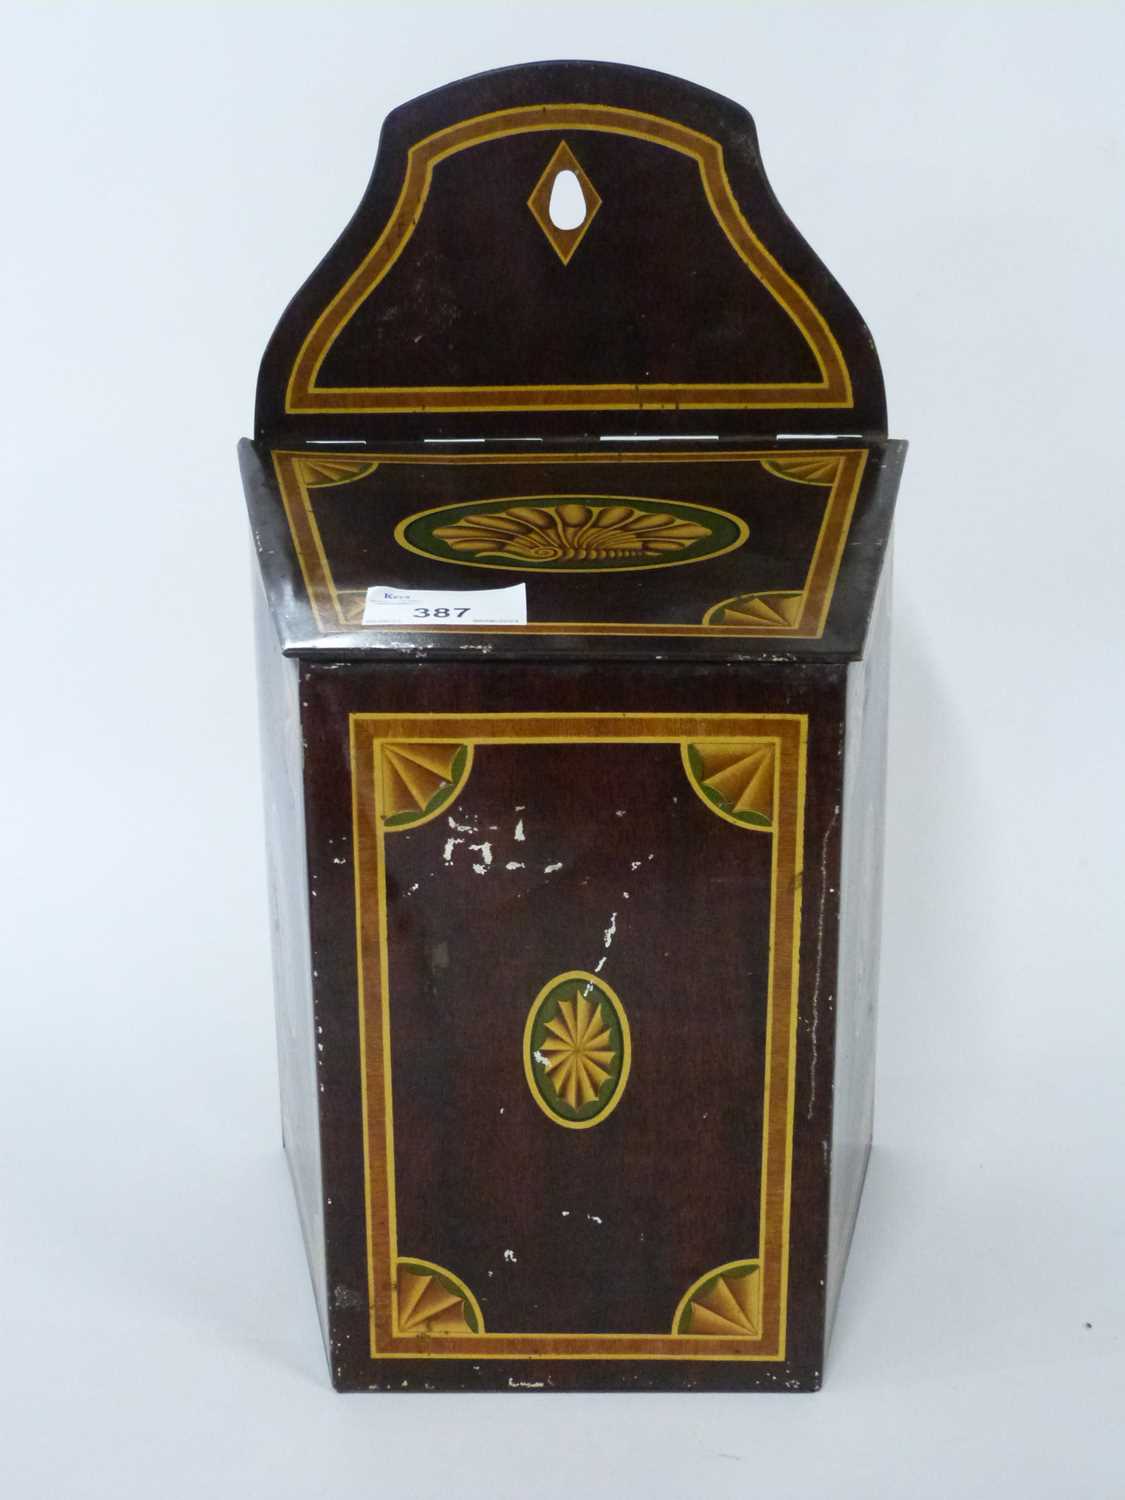 Lot 387 - Vintage biscuit tin with a shell and other motifs